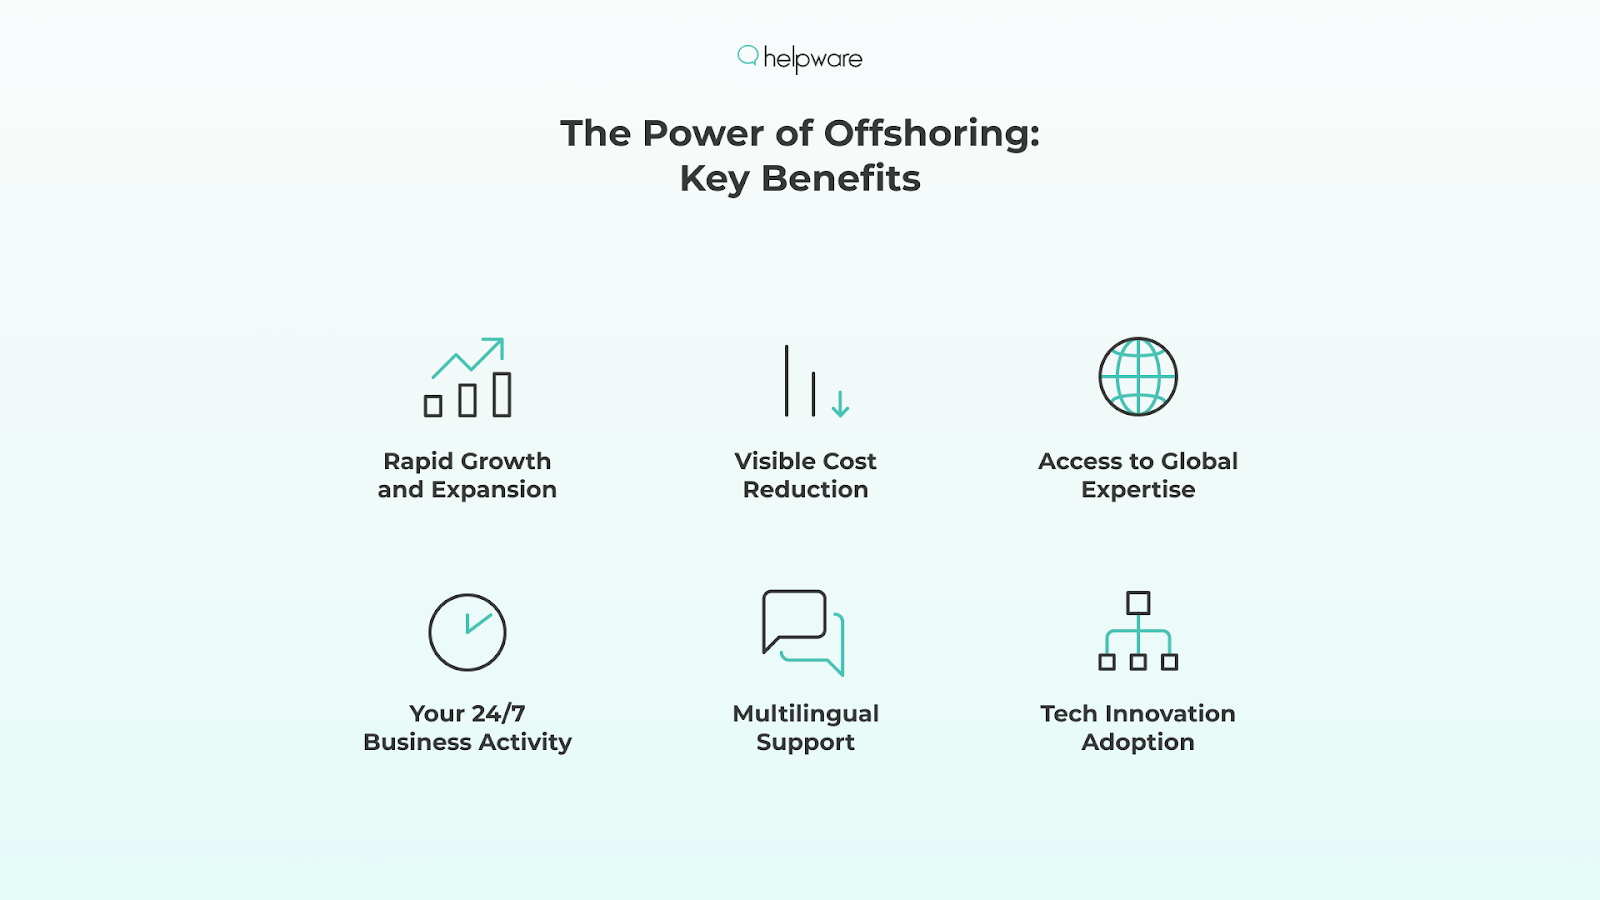 The Power of Offshoring: Key Benefits